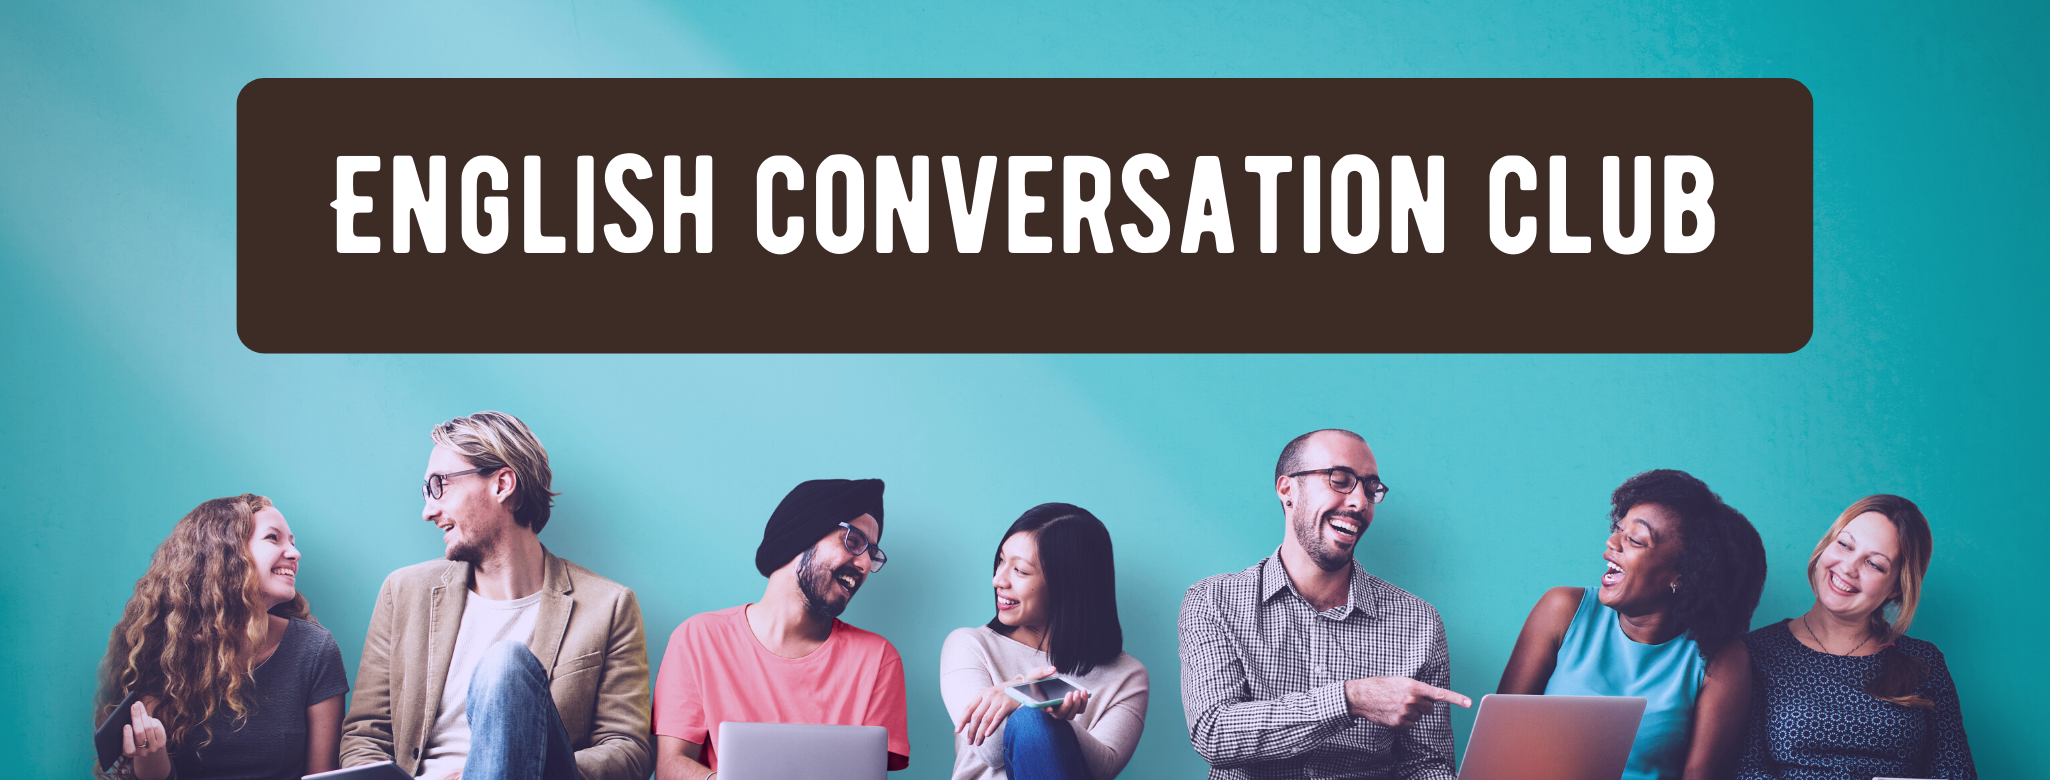 Text: English Conversation Club Image: A group of multicultural adults sit and converse against a teal wall